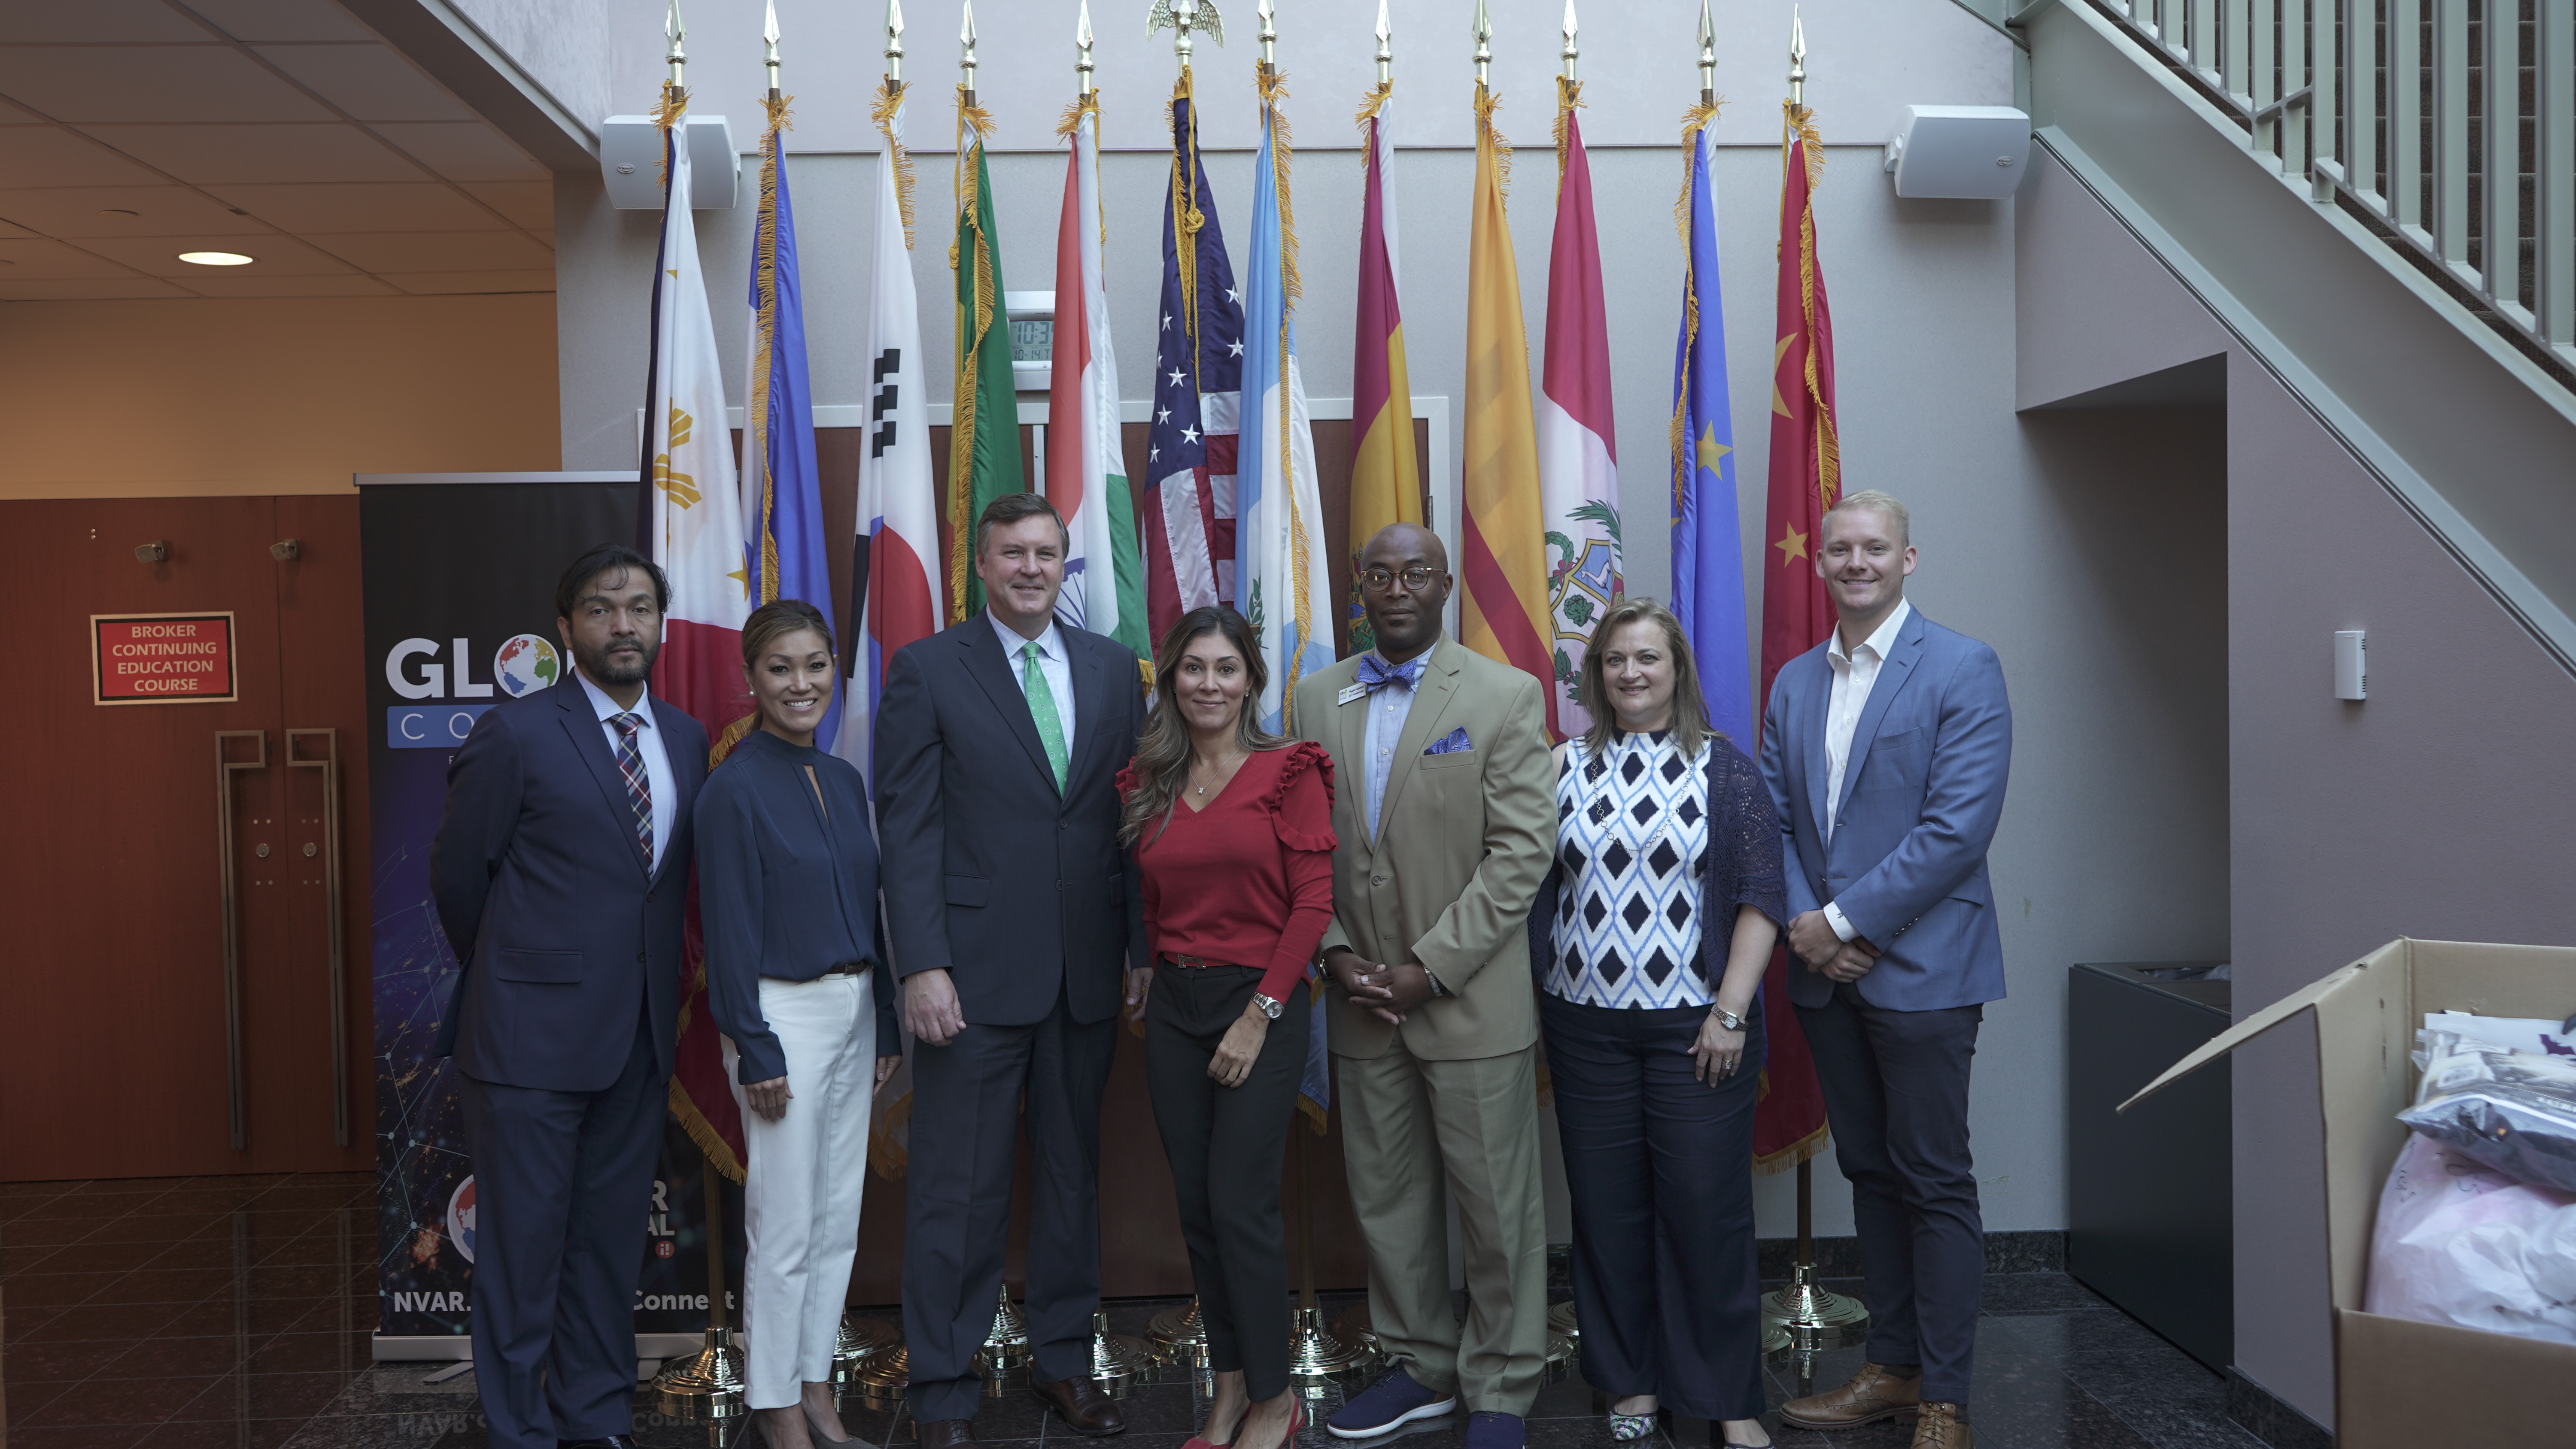 Board members in front of flags